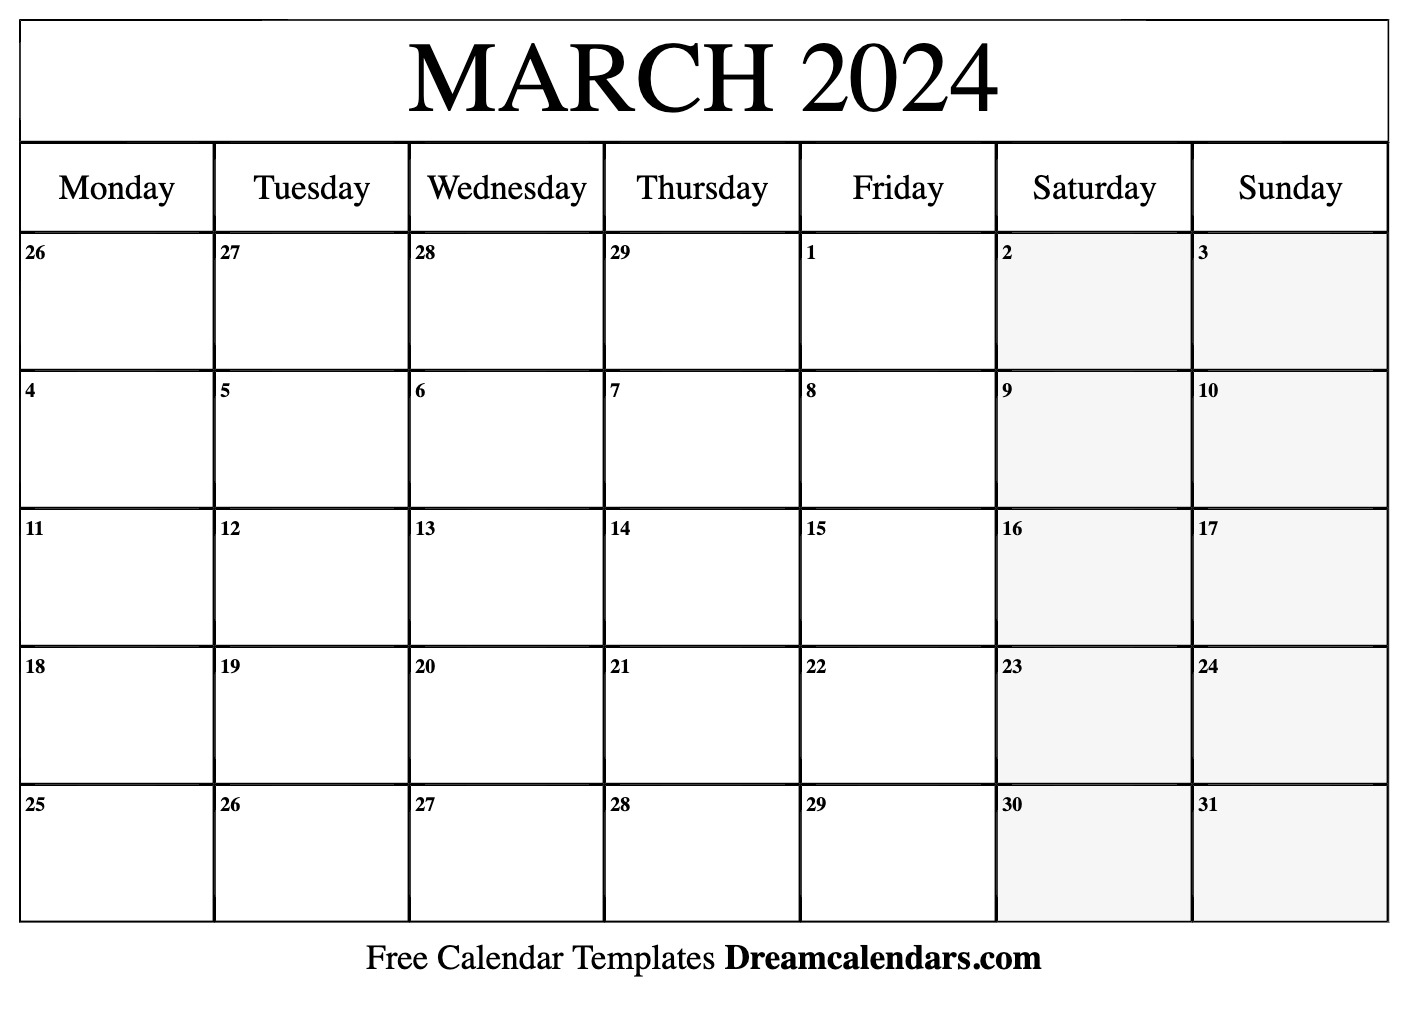 March 2024 Calendar | Free Blank Printable With Holidays for March 2024 Calendar Printable Wiki